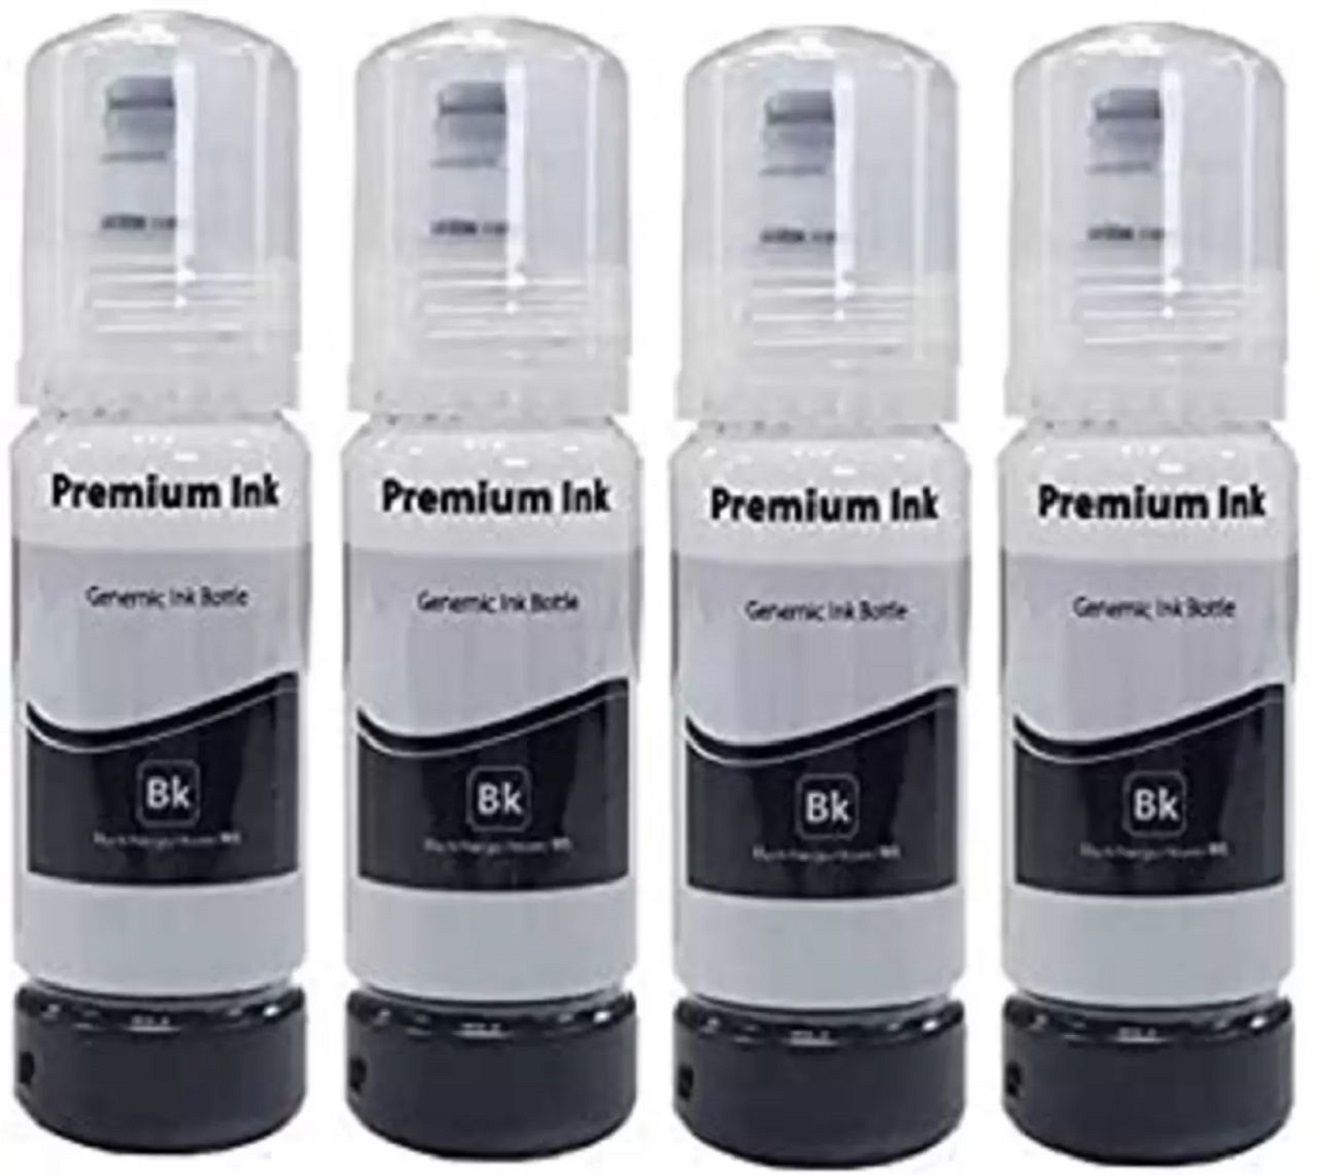     			TEQUO L3101 For 003 Ink Black Pack of 4 Cartridge for 003 Ink for E_pson L3110 L3150 L3115 L3116 L3101 L3210 L3215 L3216 L3250 L3151 L3152 L3156